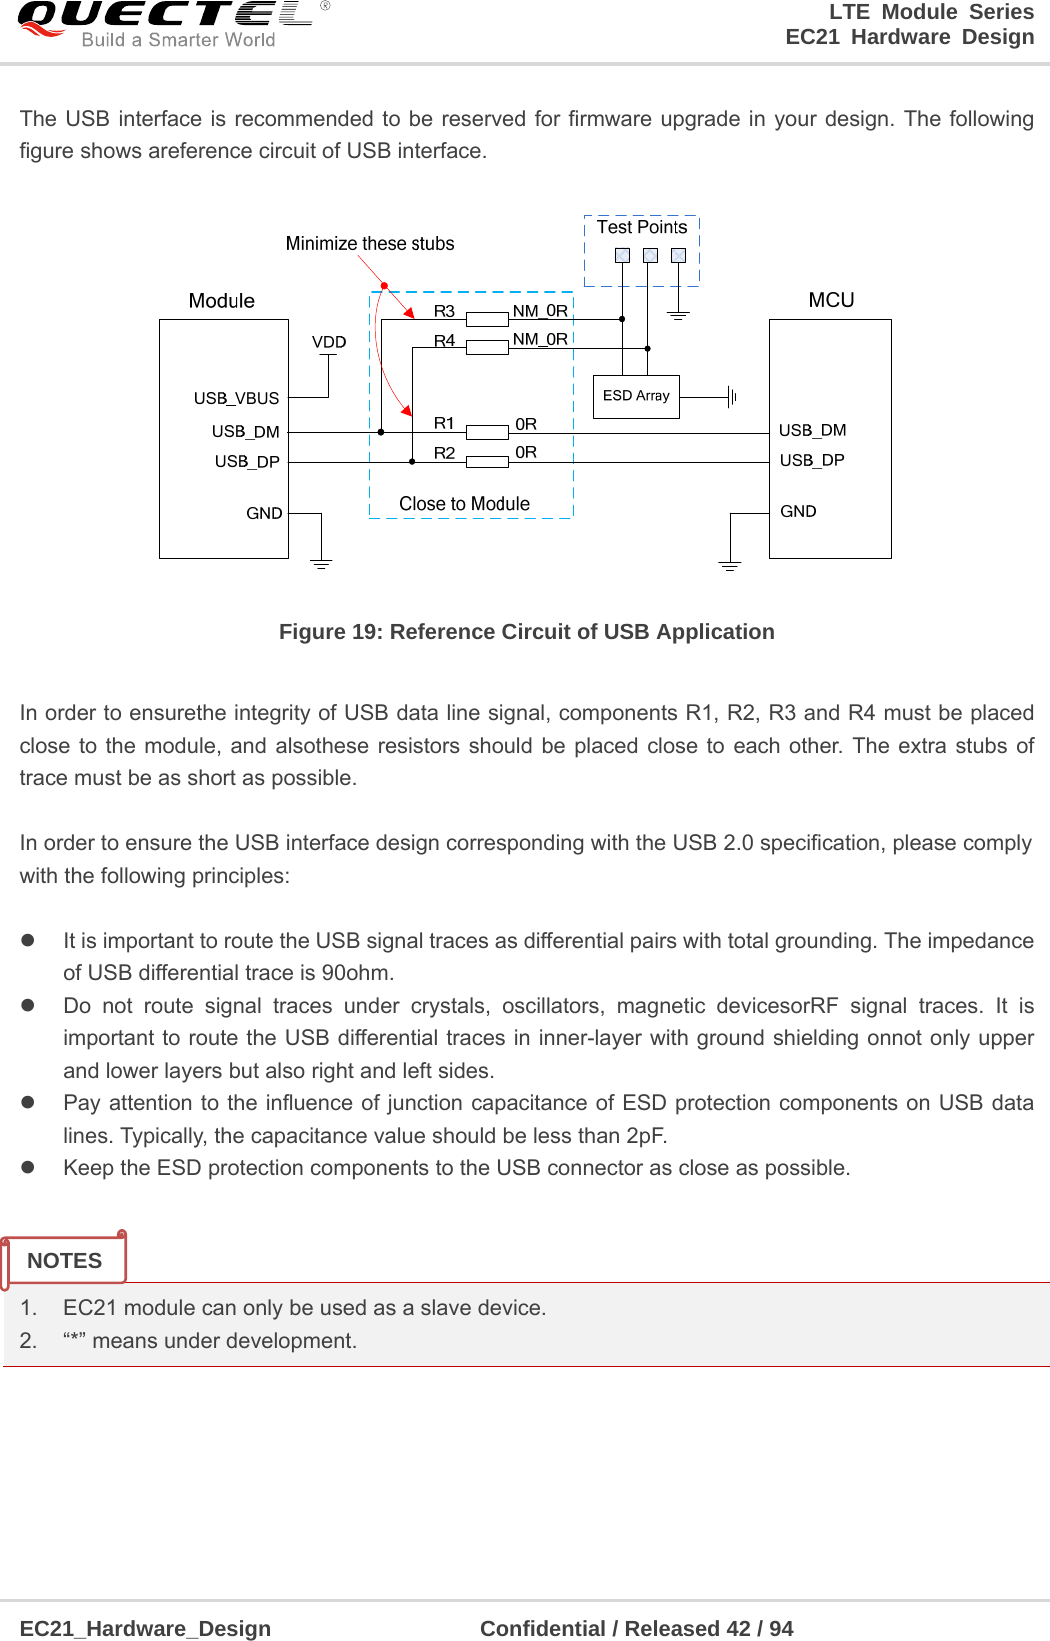 LTE Module Series                                                                 EC21 Hardware Design  EC21_Hardware_Design                   Confidential / Released 42 / 94    The USB interface is recommended to be reserved for firmware upgrade in your design. The following figure shows areference circuit of USB interface.  Figure 19: Reference Circuit of USB Application  In order to ensurethe integrity of USB data line signal, components R1, R2, R3 and R4 must be placed close to the module, and alsothese resistors should be placed close to each other. The extra stubs of trace must be as short as possible.  In order to ensure the USB interface design corresponding with the USB 2.0 specification, please comply with the following principles:    It is important to route the USB signal traces as differential pairs with total grounding. The impedance of USB differential trace is 90ohm.   Do not route signal traces under crystals, oscillators, magnetic devicesorRF signal traces. It is important to route the USB differential traces in inner-layer with ground shielding onnot only upper and lower layers but also right and left sides.   Pay attention to the influence of junction capacitance of ESD protection components on USB data lines. Typically, the capacitance value should be less than 2pF.   Keep the ESD protection components to the USB connector as close as possible.   1.  EC21 module can only be used as a slave device. 2.  “*” means under development.   NOTES 